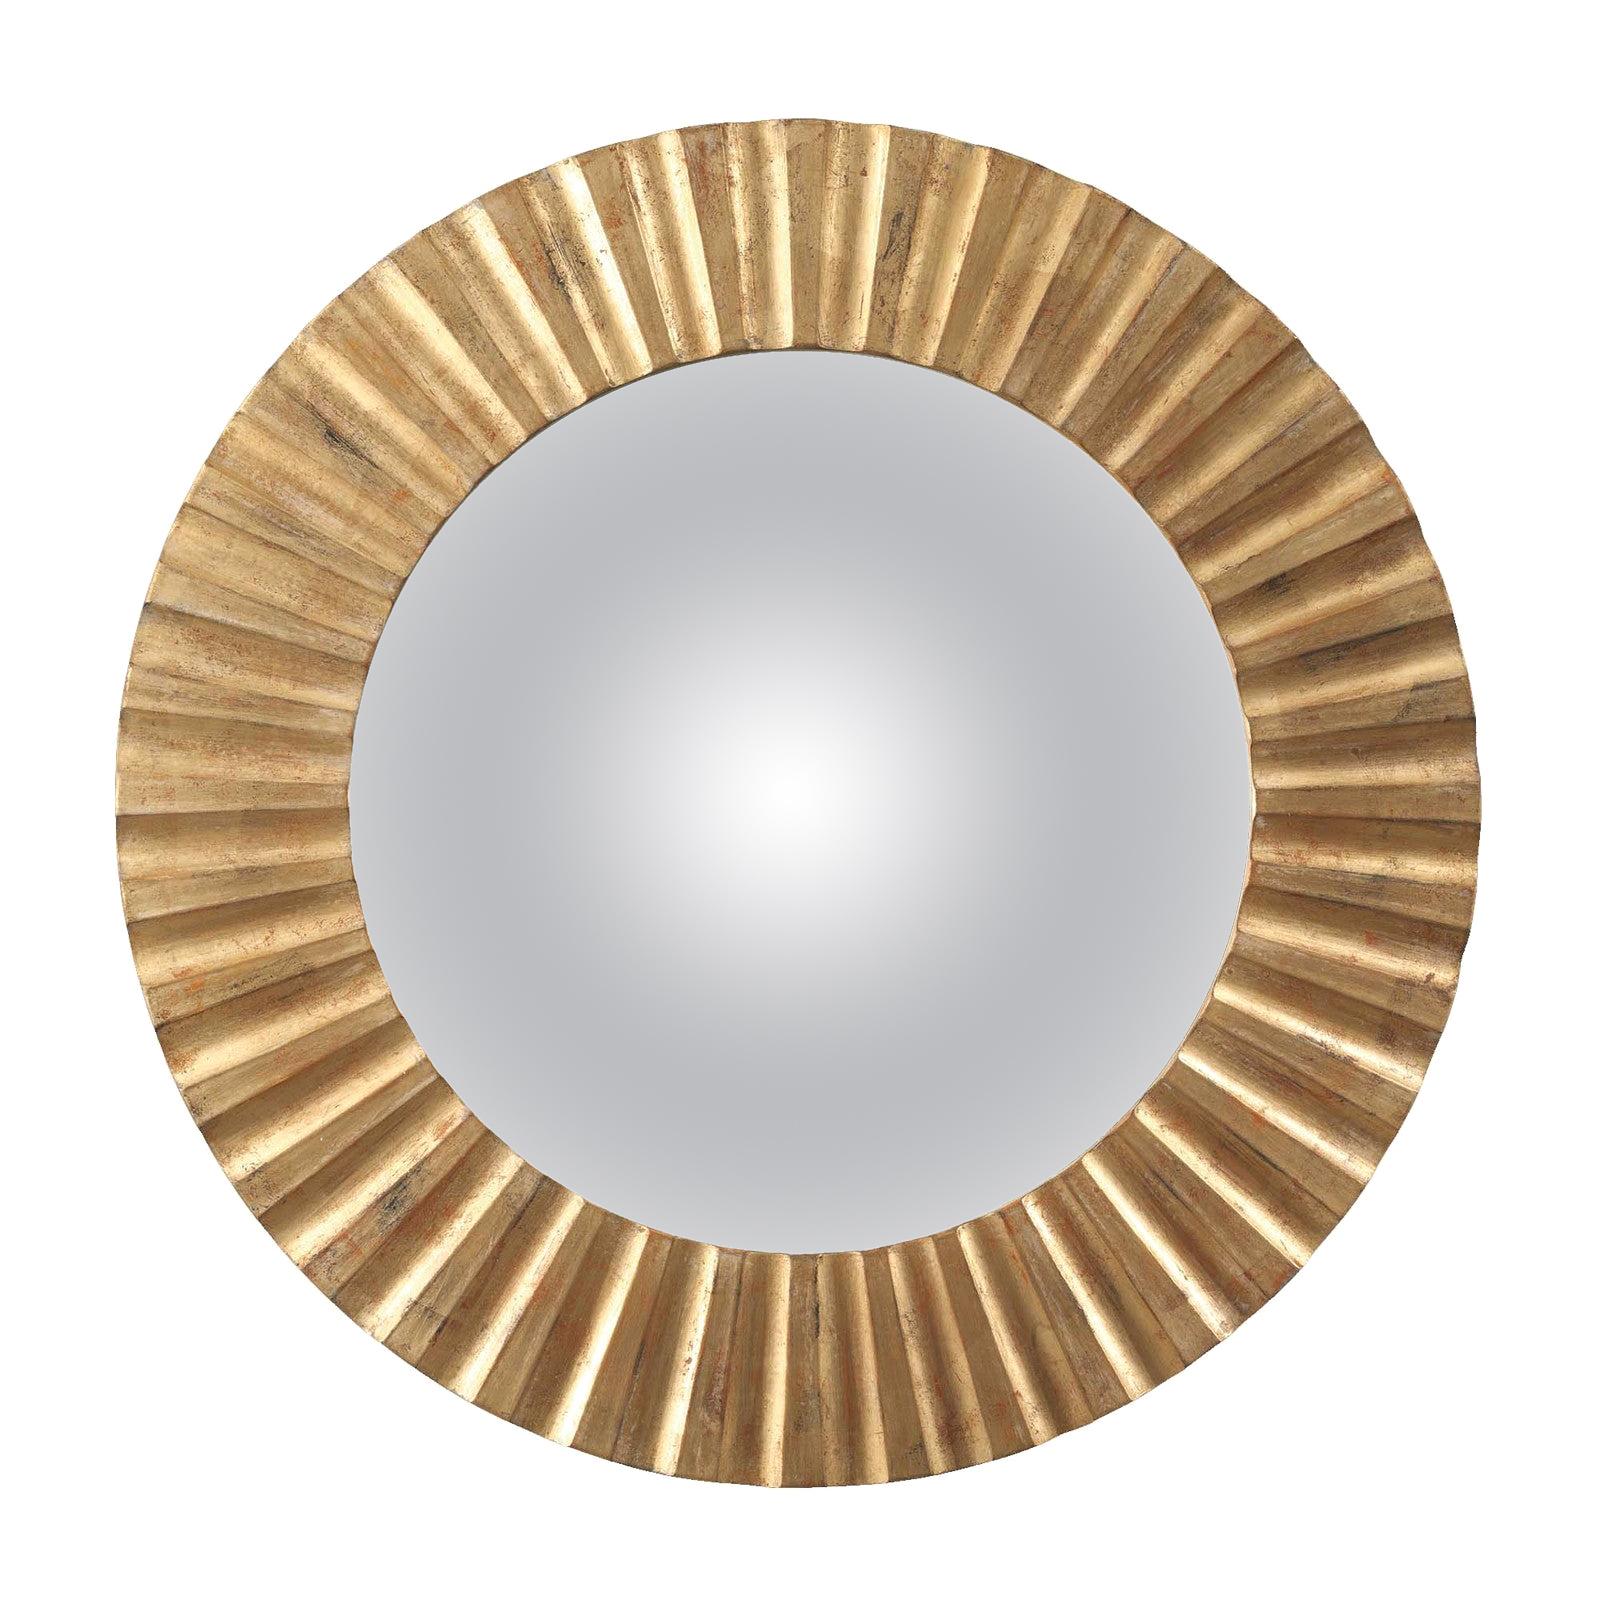 Sun Gold Mirror by Spini Firenze